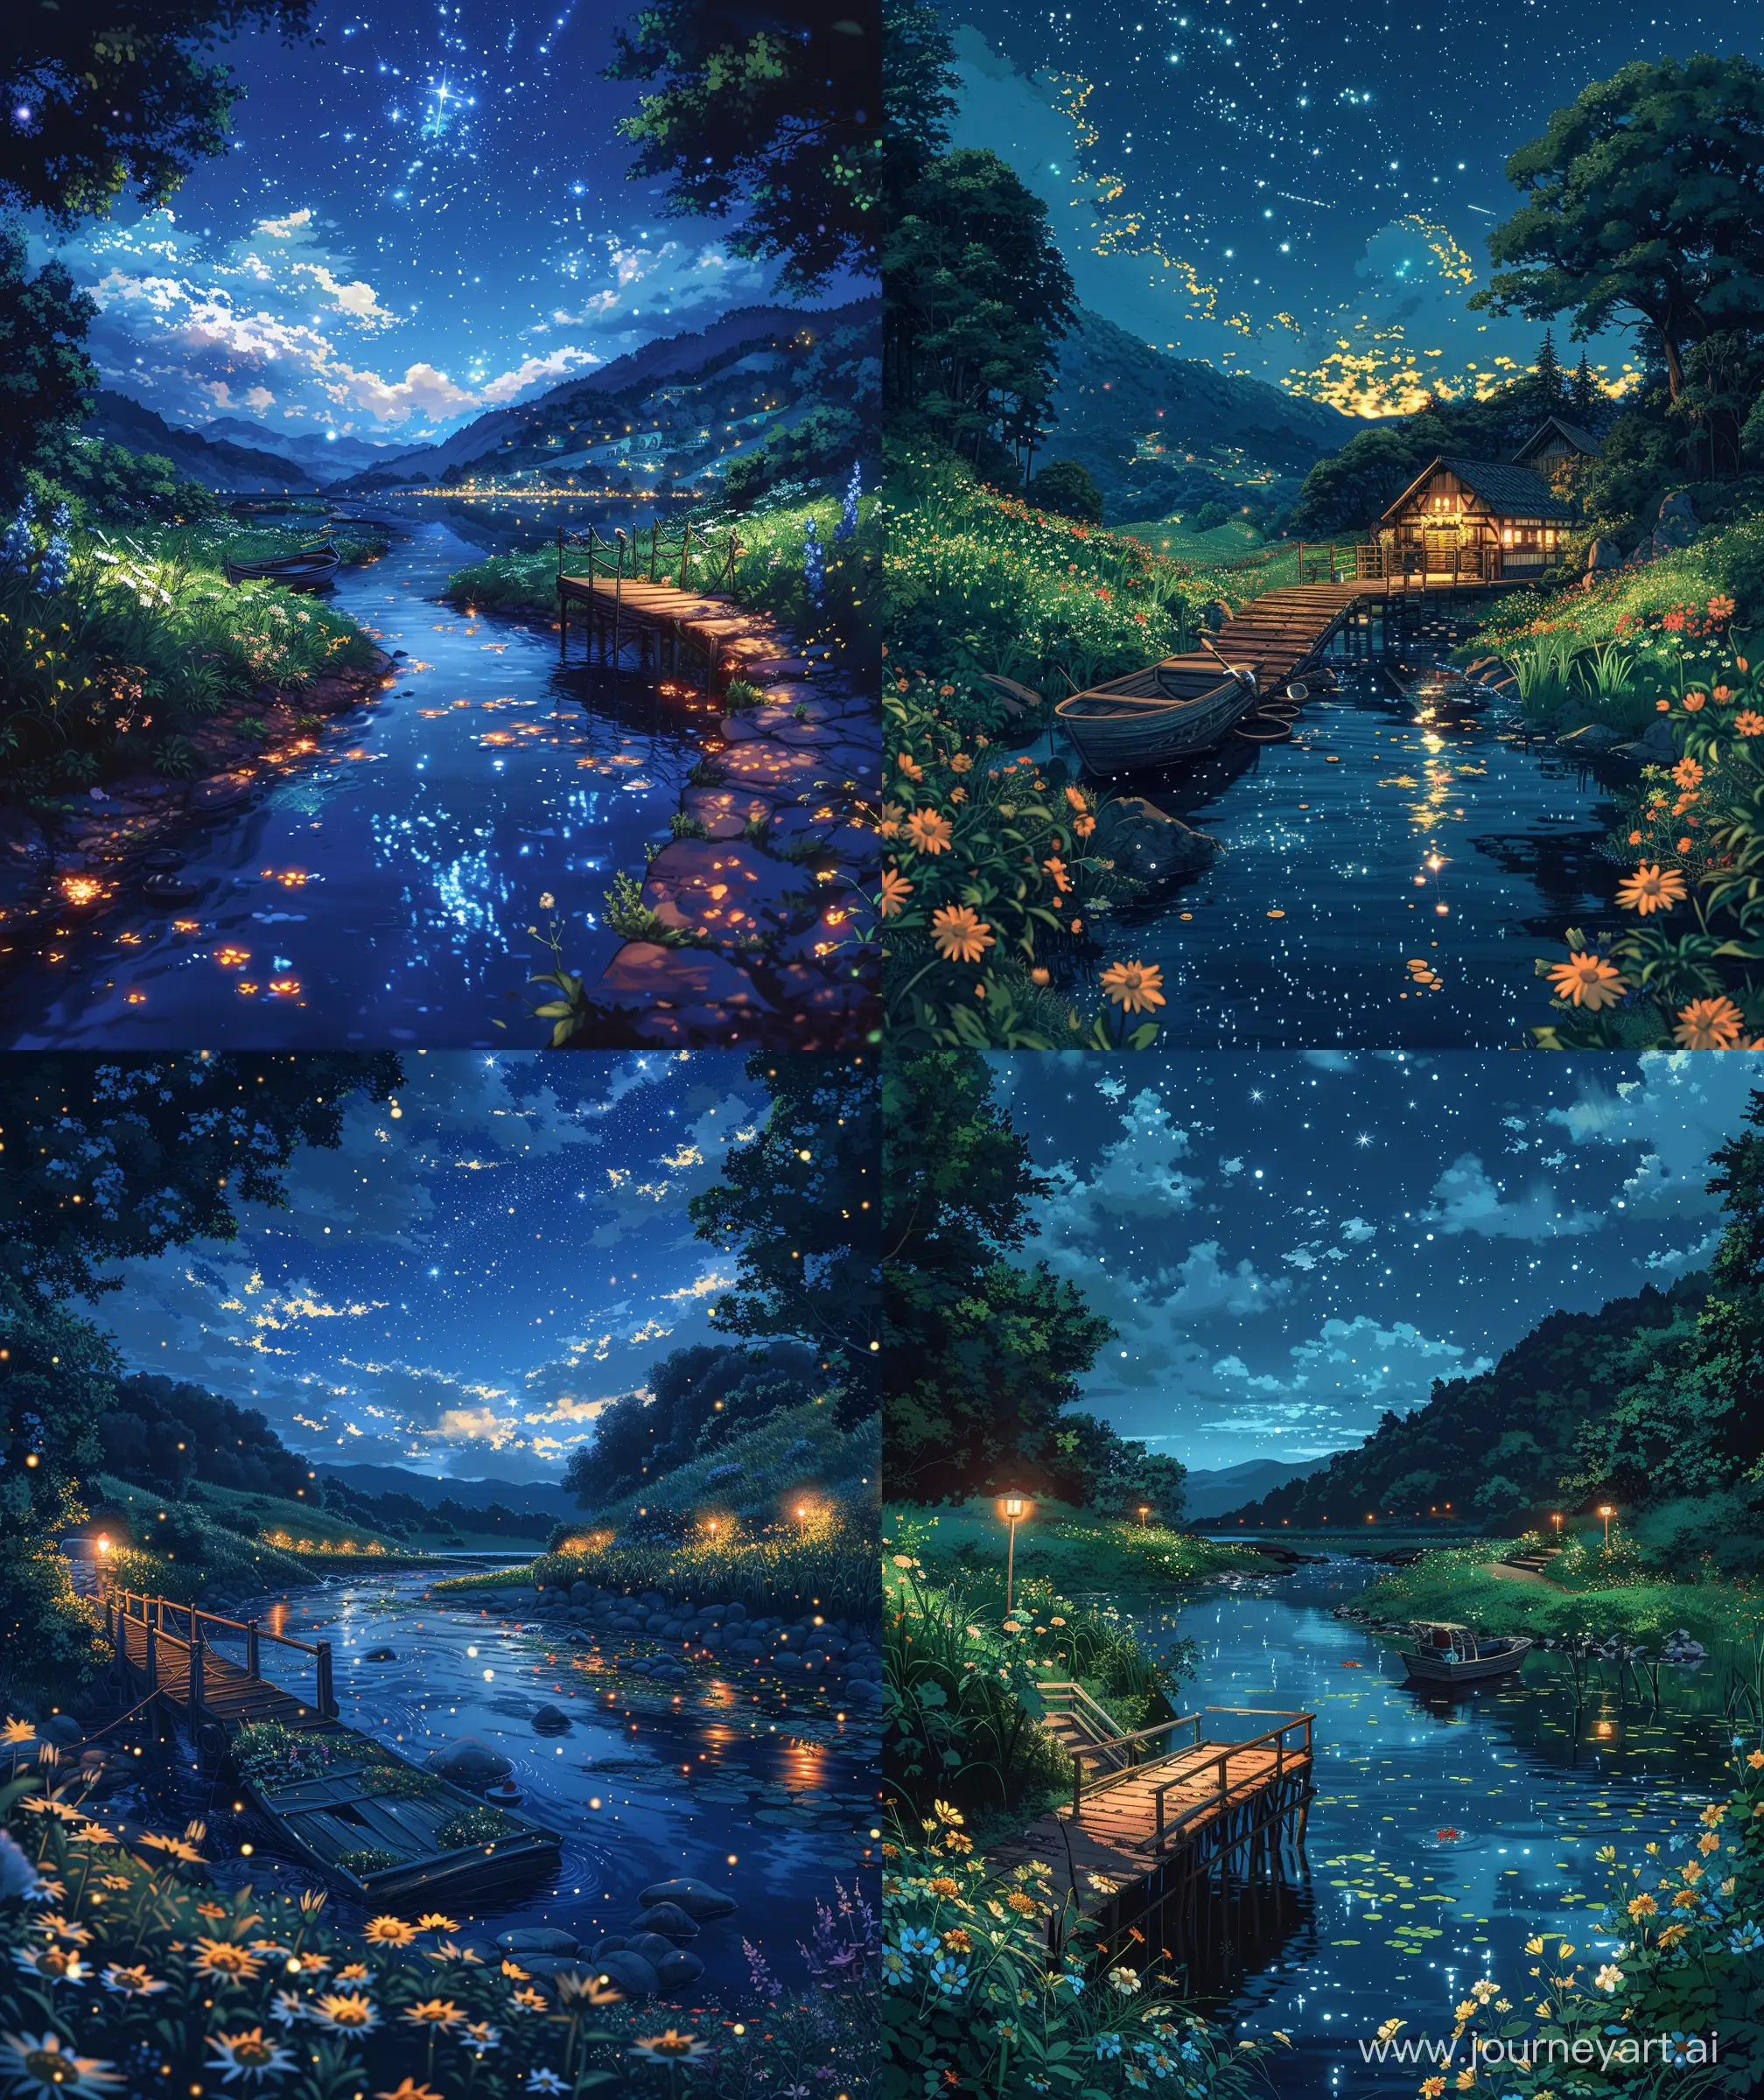 GhibliInspired-Anime-Scene-Nighttime-River-Valley-with-Boat-Pier-and-Starry-Sky